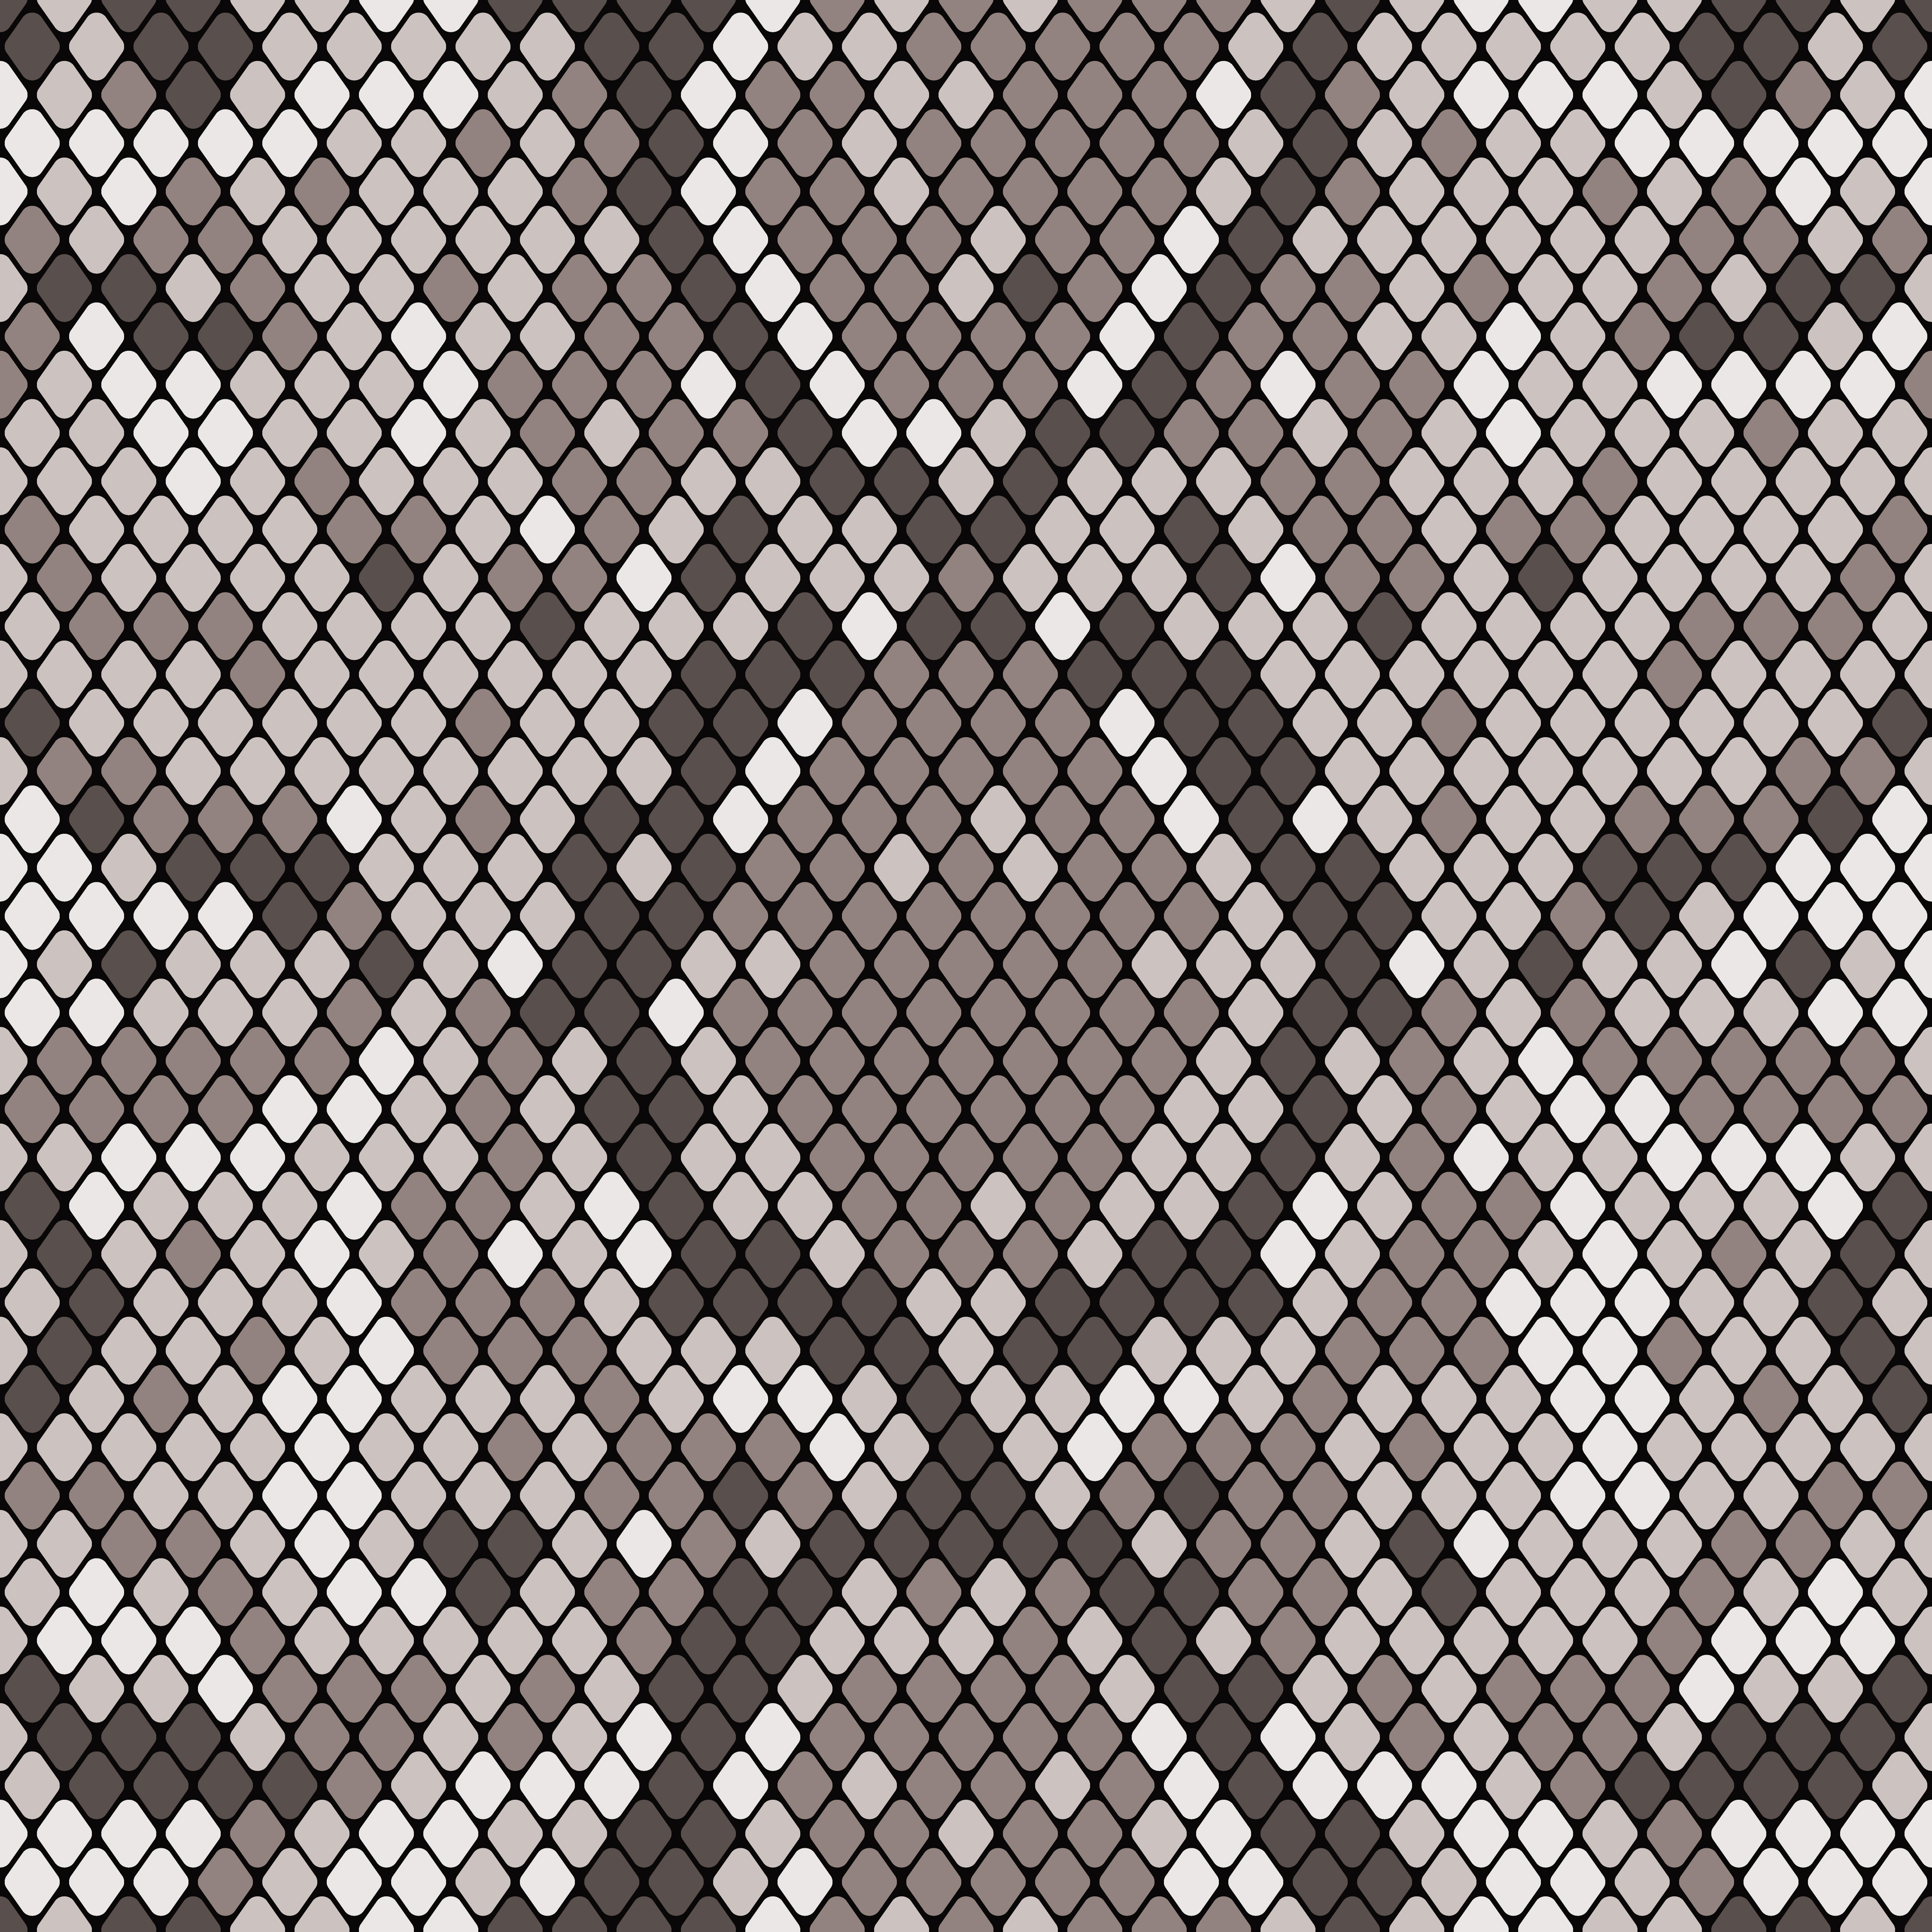 Snakeskin seamless pattern. Realistic texture of snake or another 